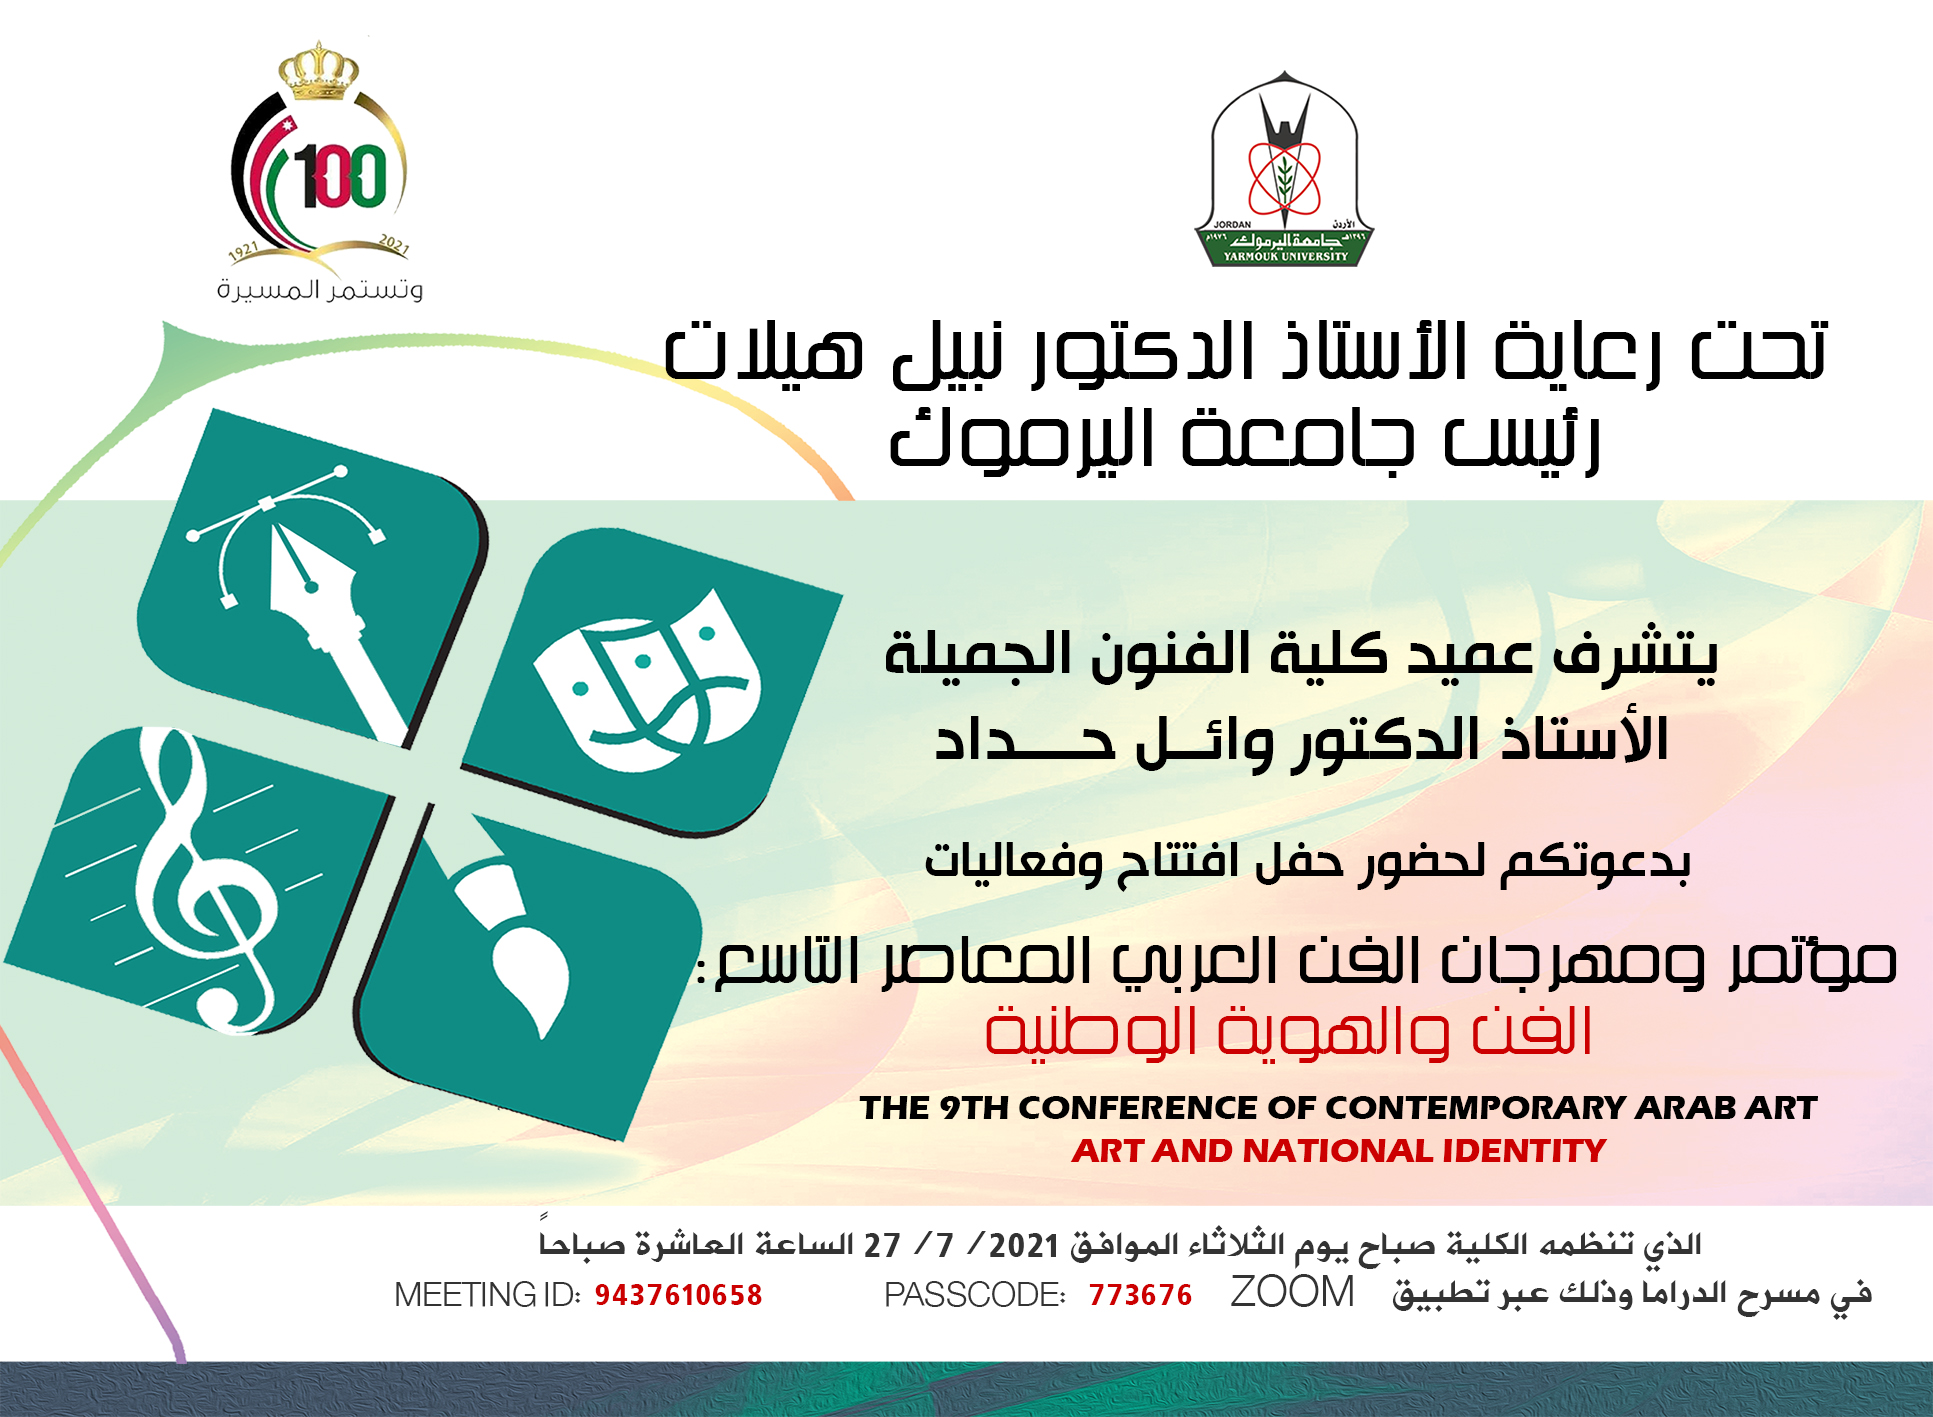 Schedule of the Ninth Contemporary Arab Art Conference 